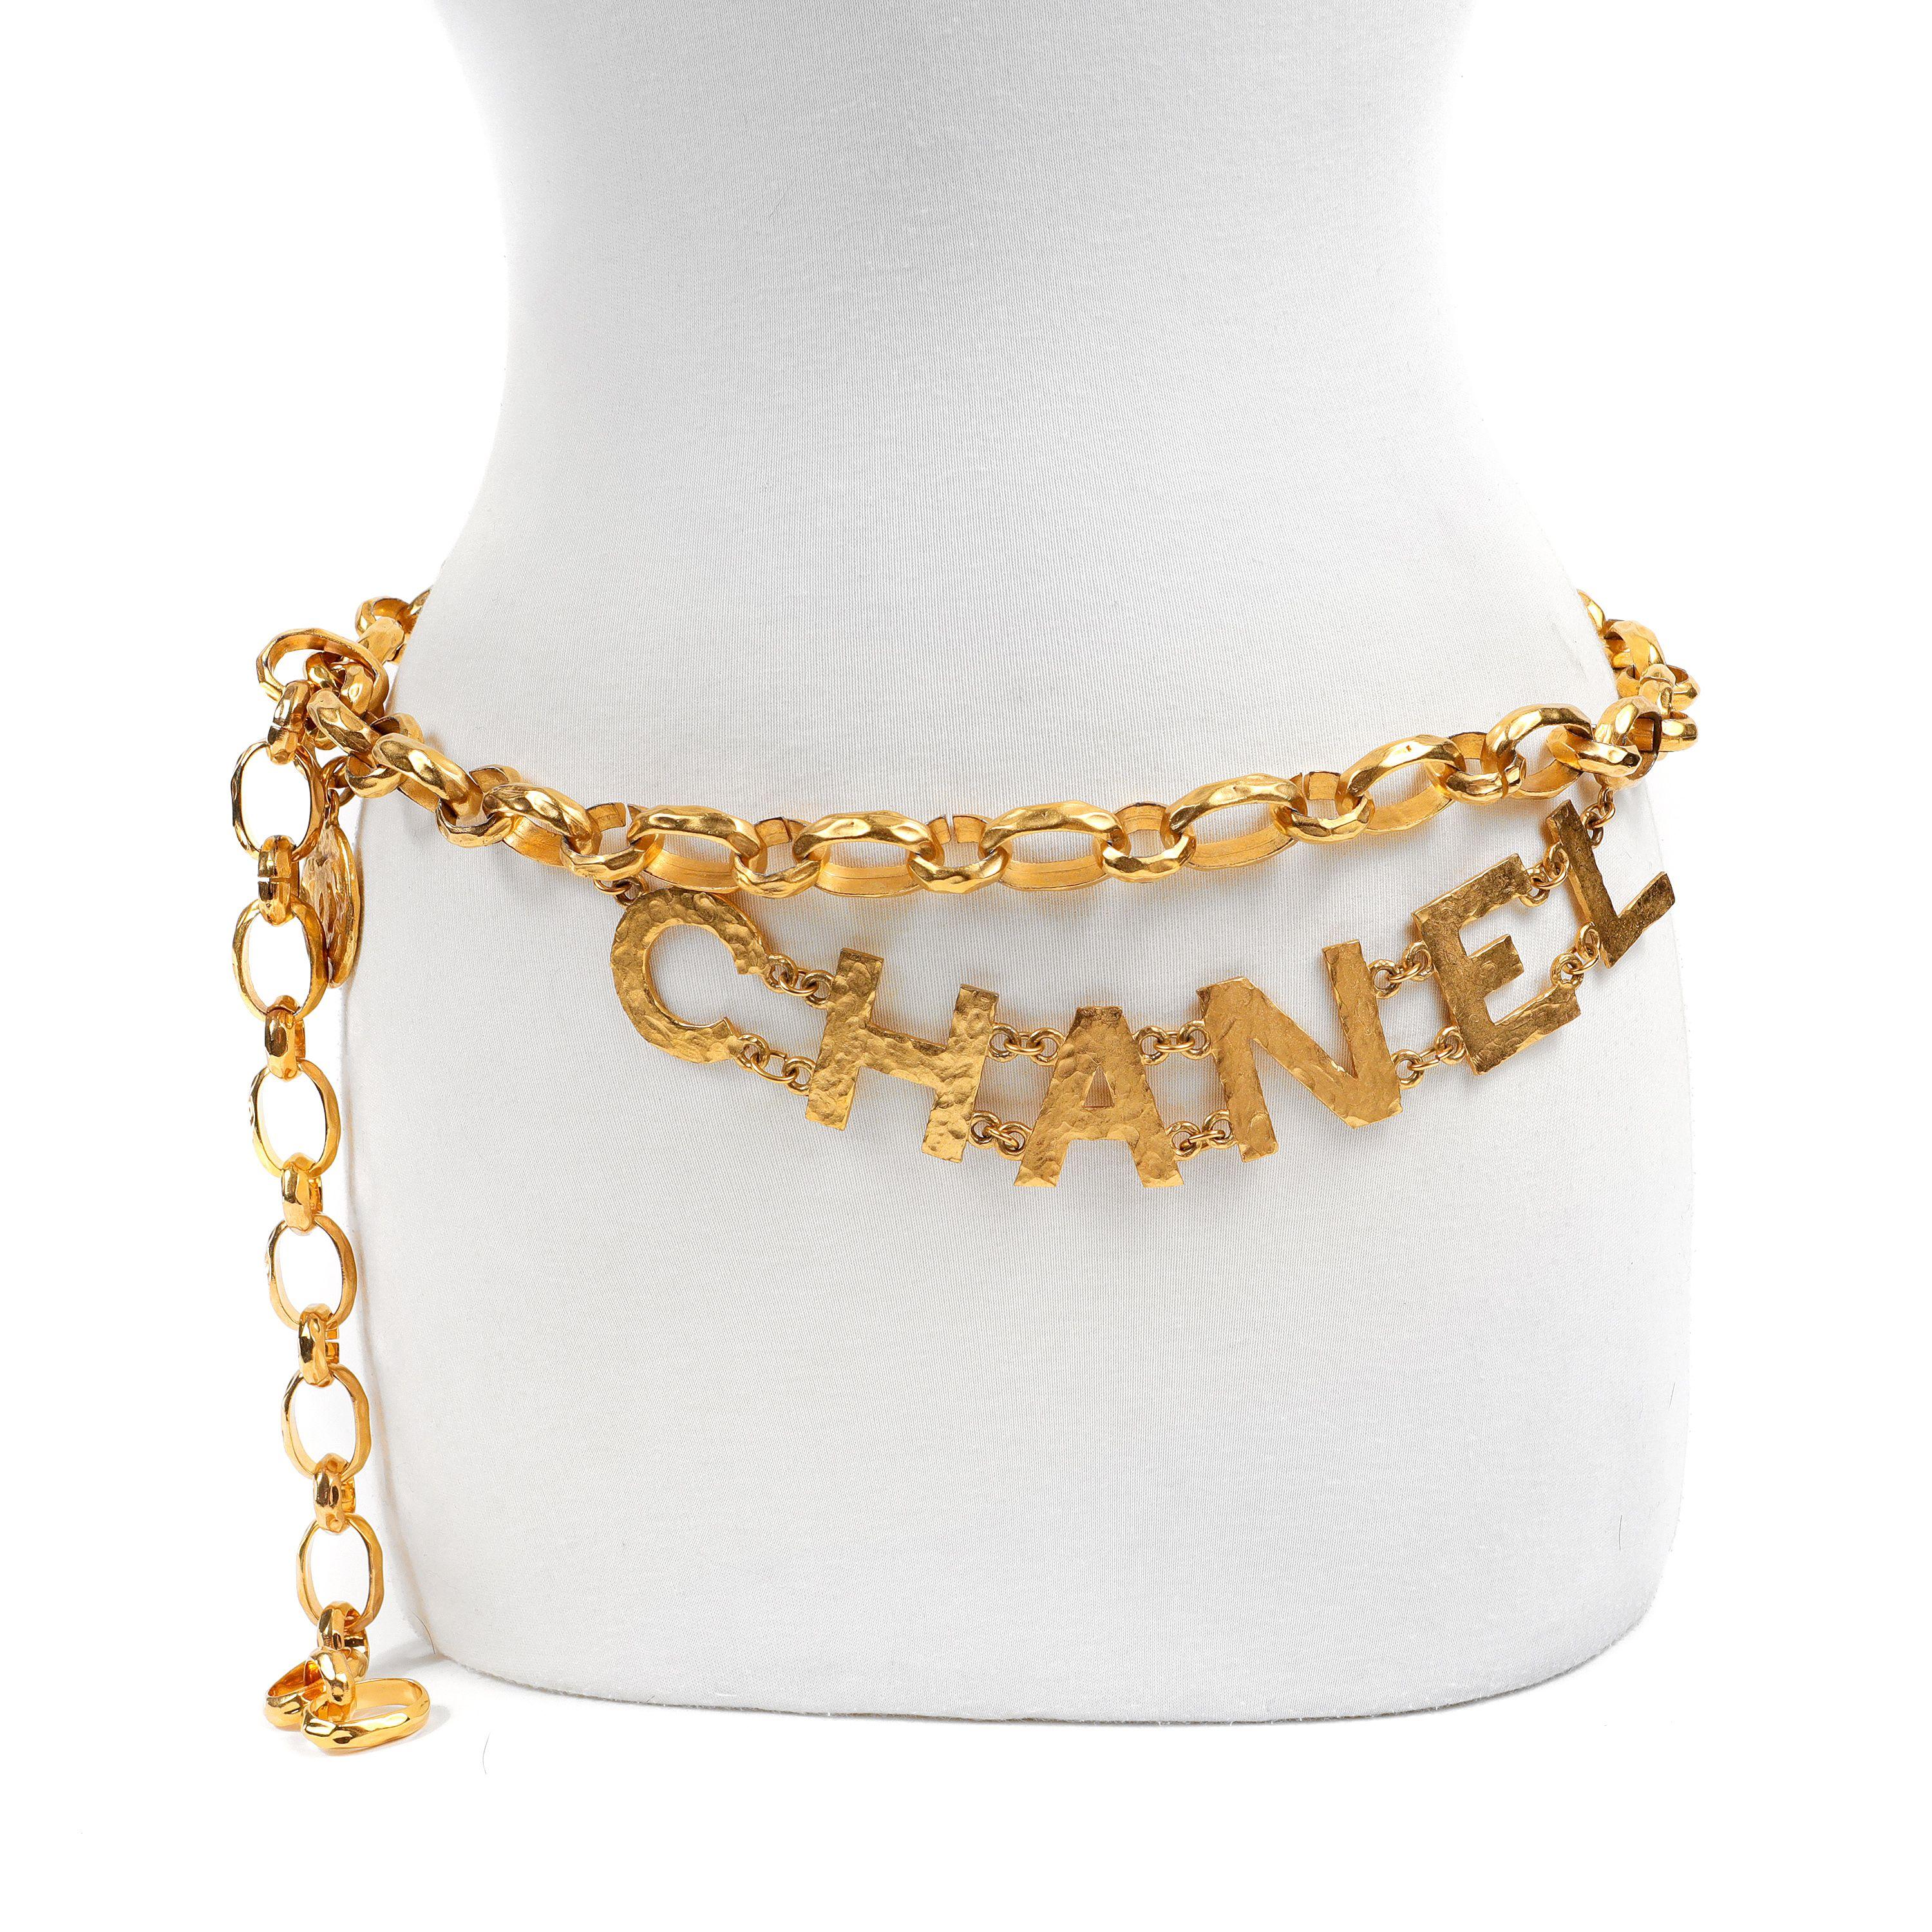 This authentic Chanel Vintage Double Chain CHANEL Runway Belt is pristine.  Highly collectible must have piece.  24 karat gold plated substantial link belt with CHANEL lettering.  Adjustable length.  

PBF 13762
